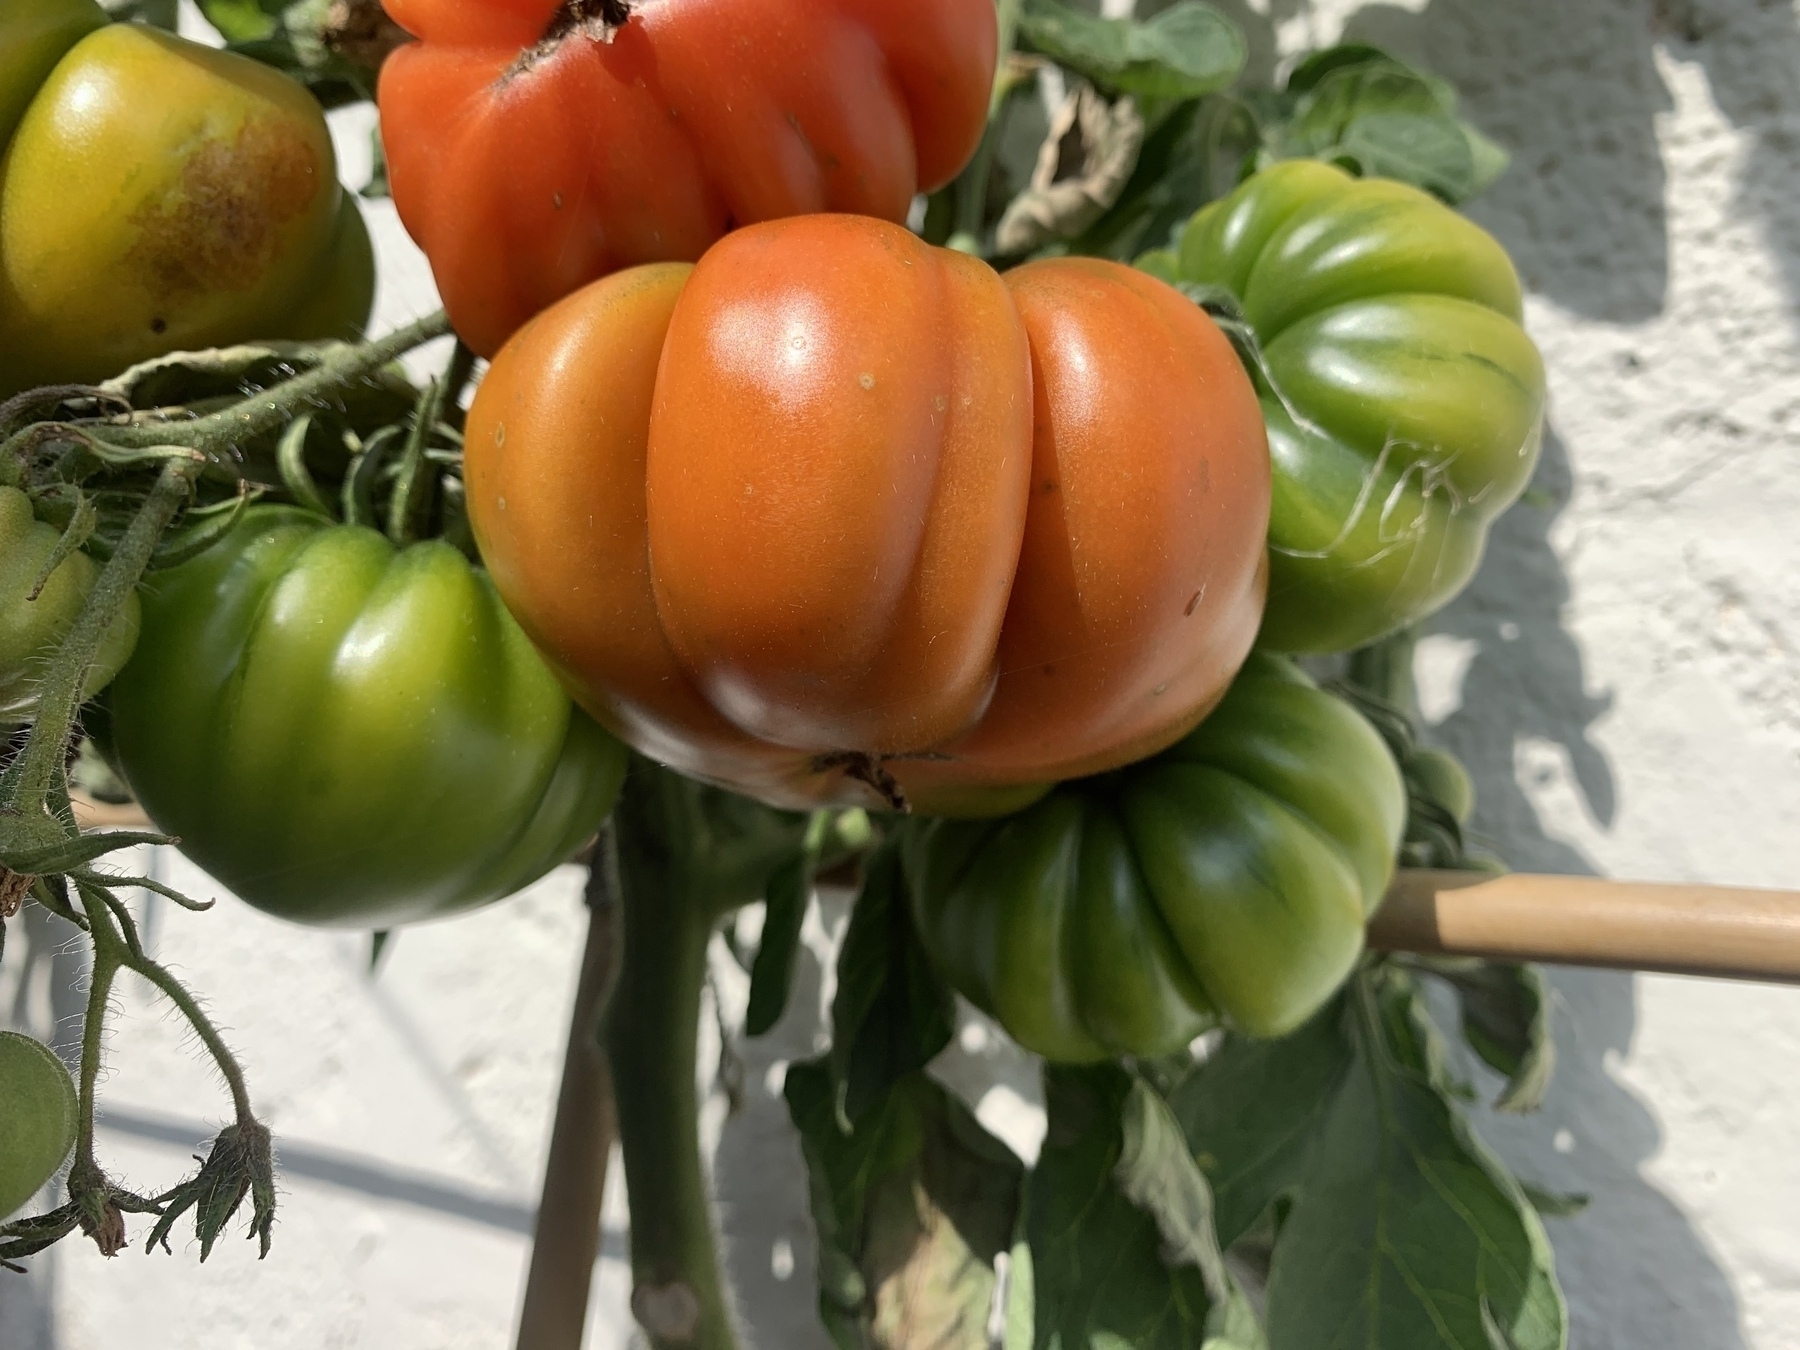 Beefsteak tomatoes growing on a plant. In the foreground the tomato is orange, behind it there are three green tomatoes and one red.